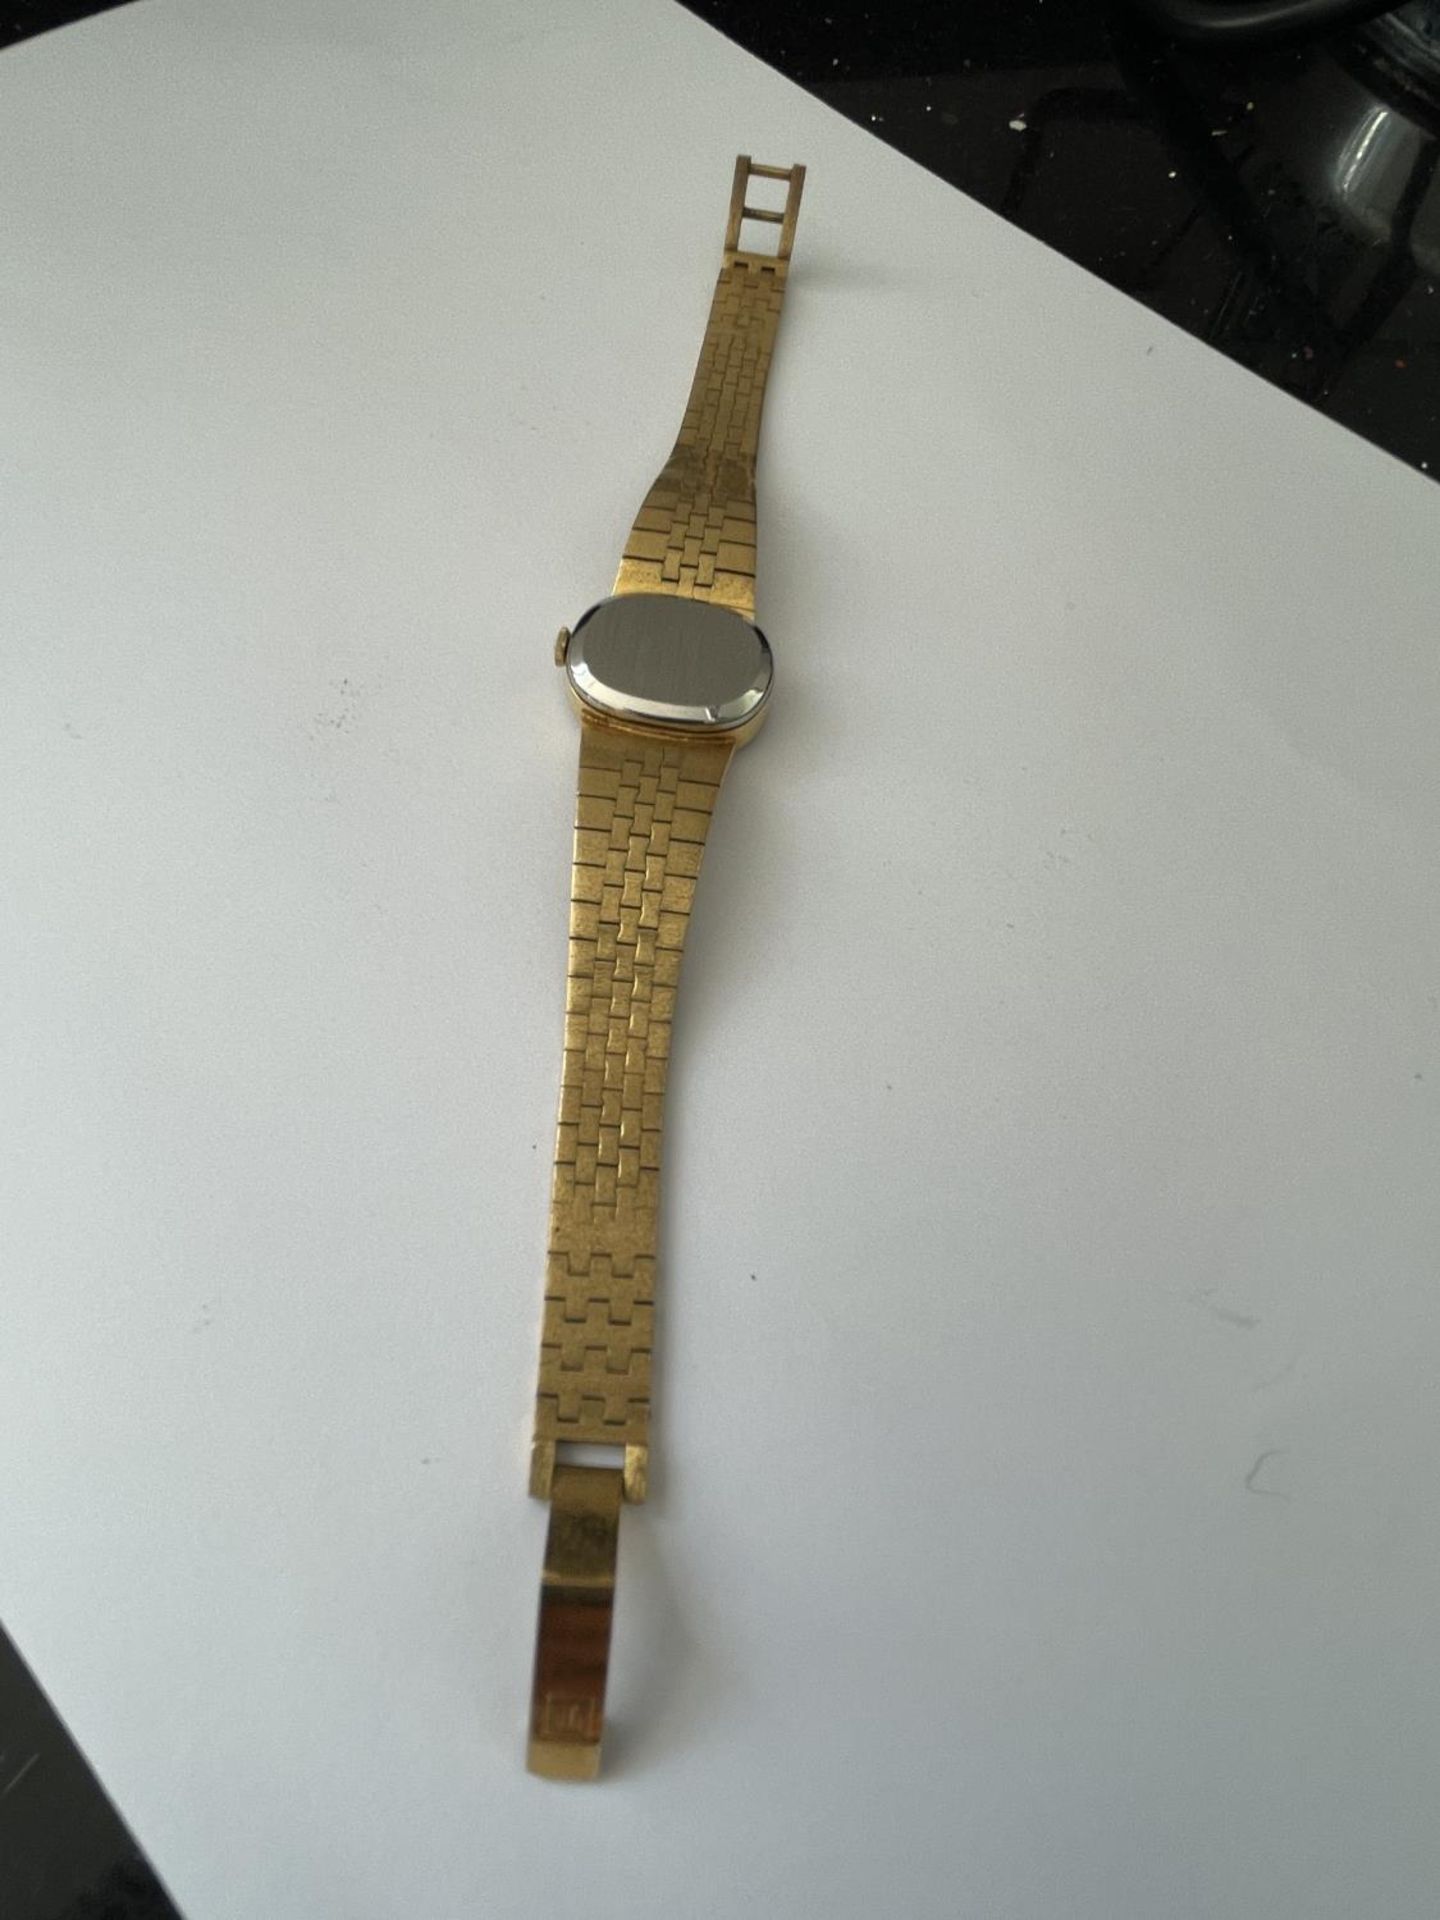 A TISSOT WRISTWATCH WITH YELLOW METAL STRAP SEEN WORKING BUT NO WARRANTY - Image 3 of 3